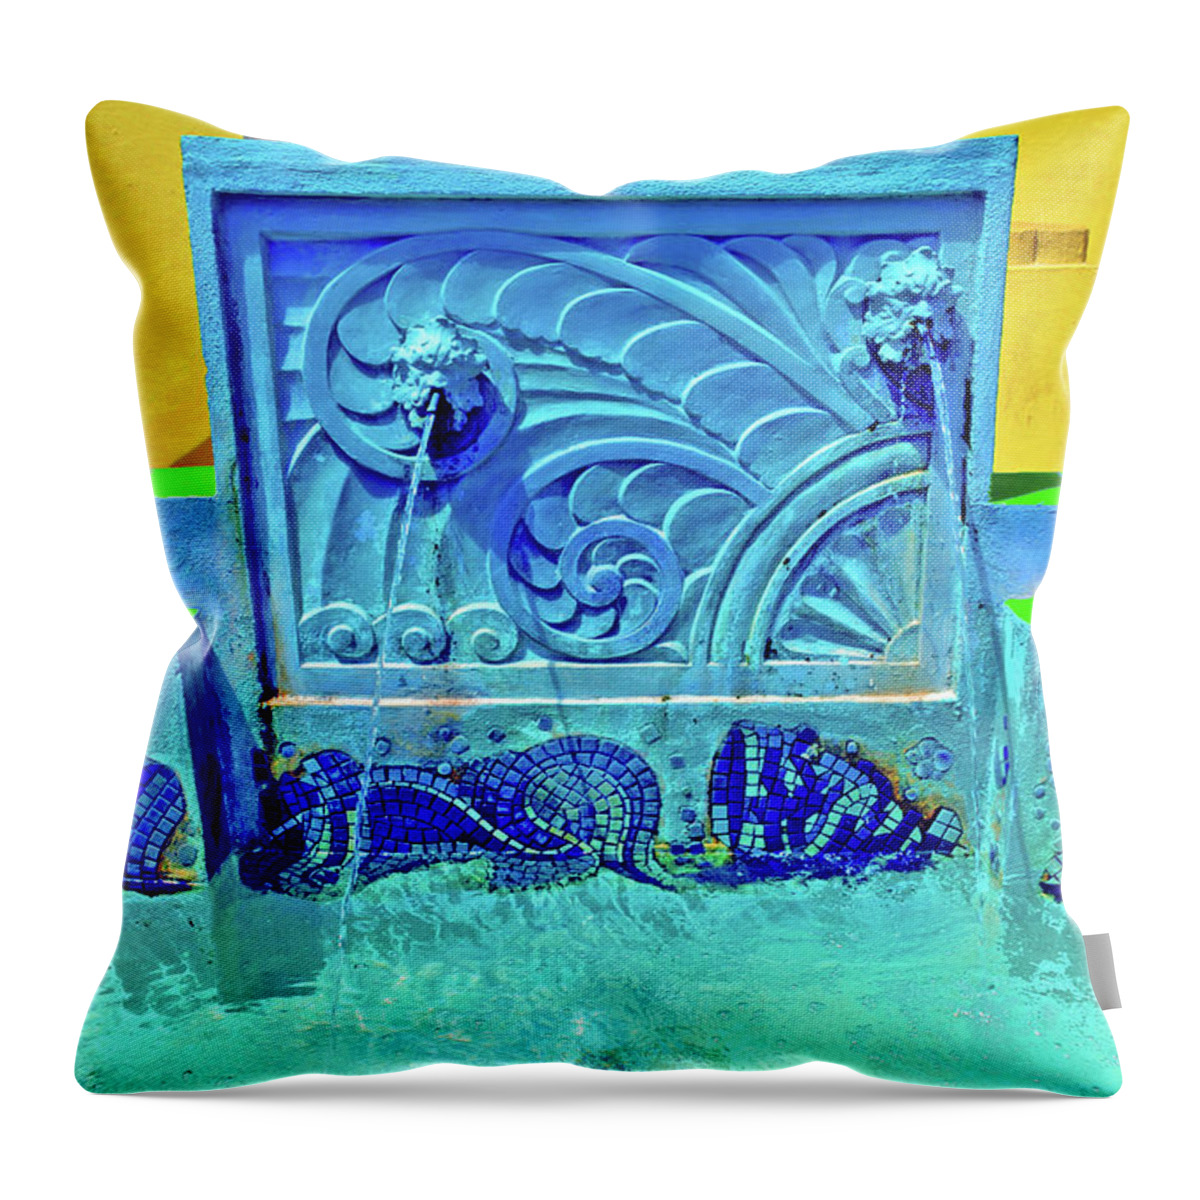 Miami Throw Pillow featuring the photograph Netherland by Jost Houk